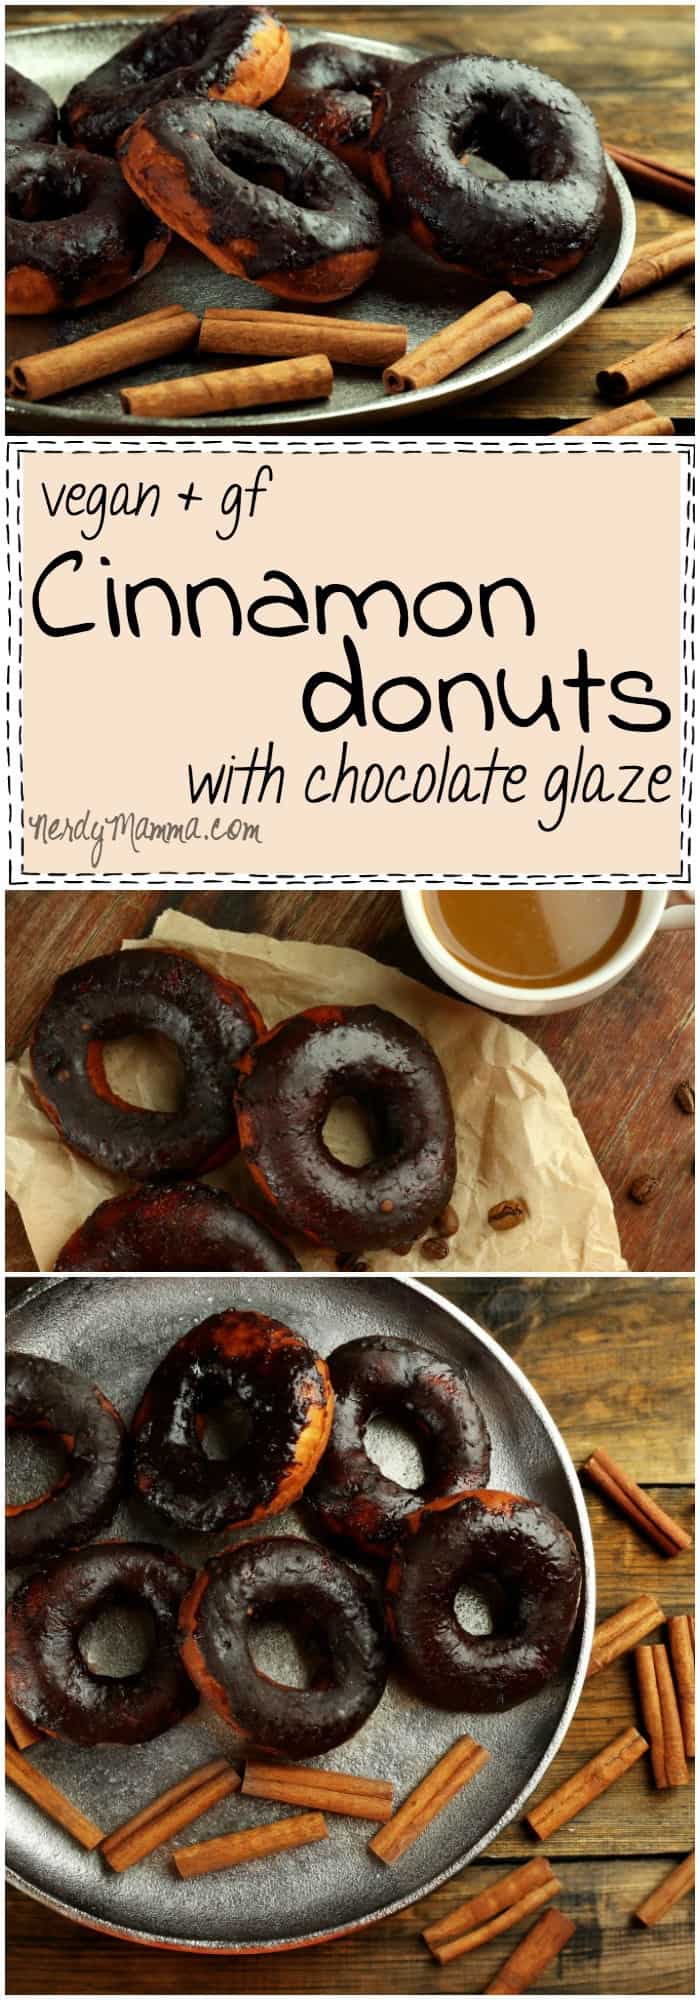 I love this recipe for vegan and gluten-free cinnamon donuts (with a chocolate glaze that looks soooo yummy!). I think I'll be making these this weekend.